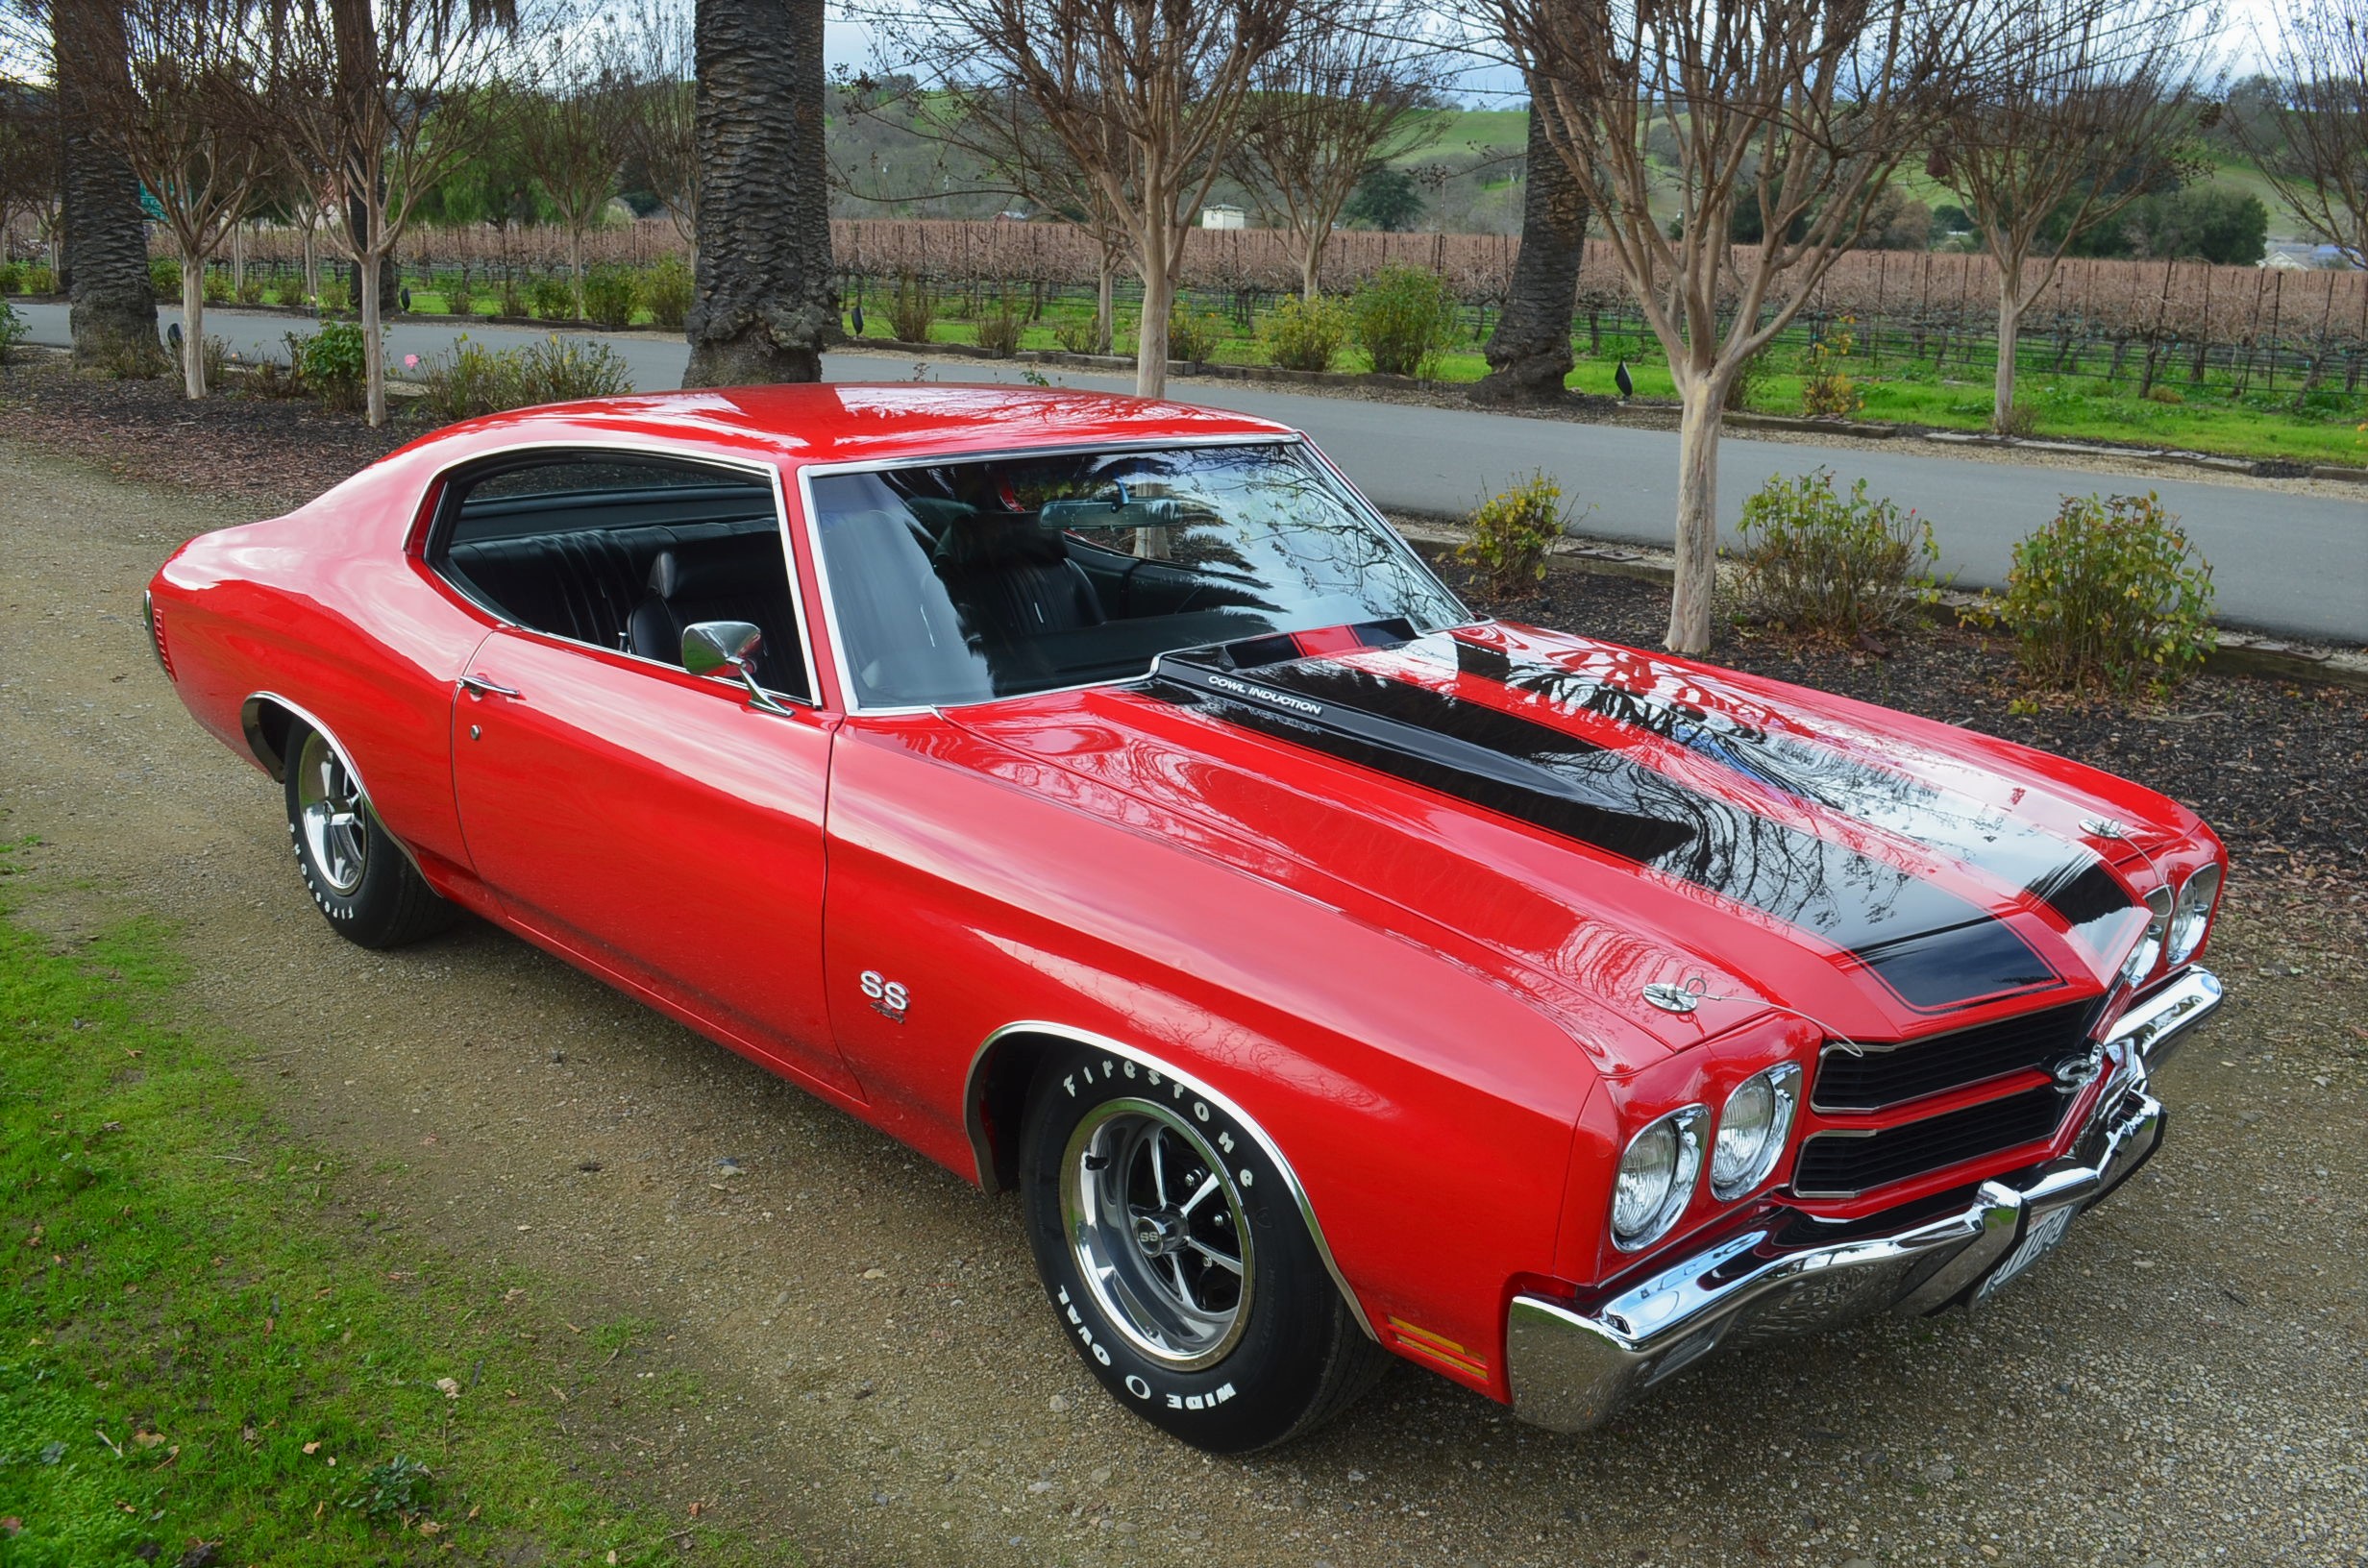 1970 Chevelle SS454 4-Speed, Posi, Cowl Induction - CLASSIC CARS LTD, Pleas...